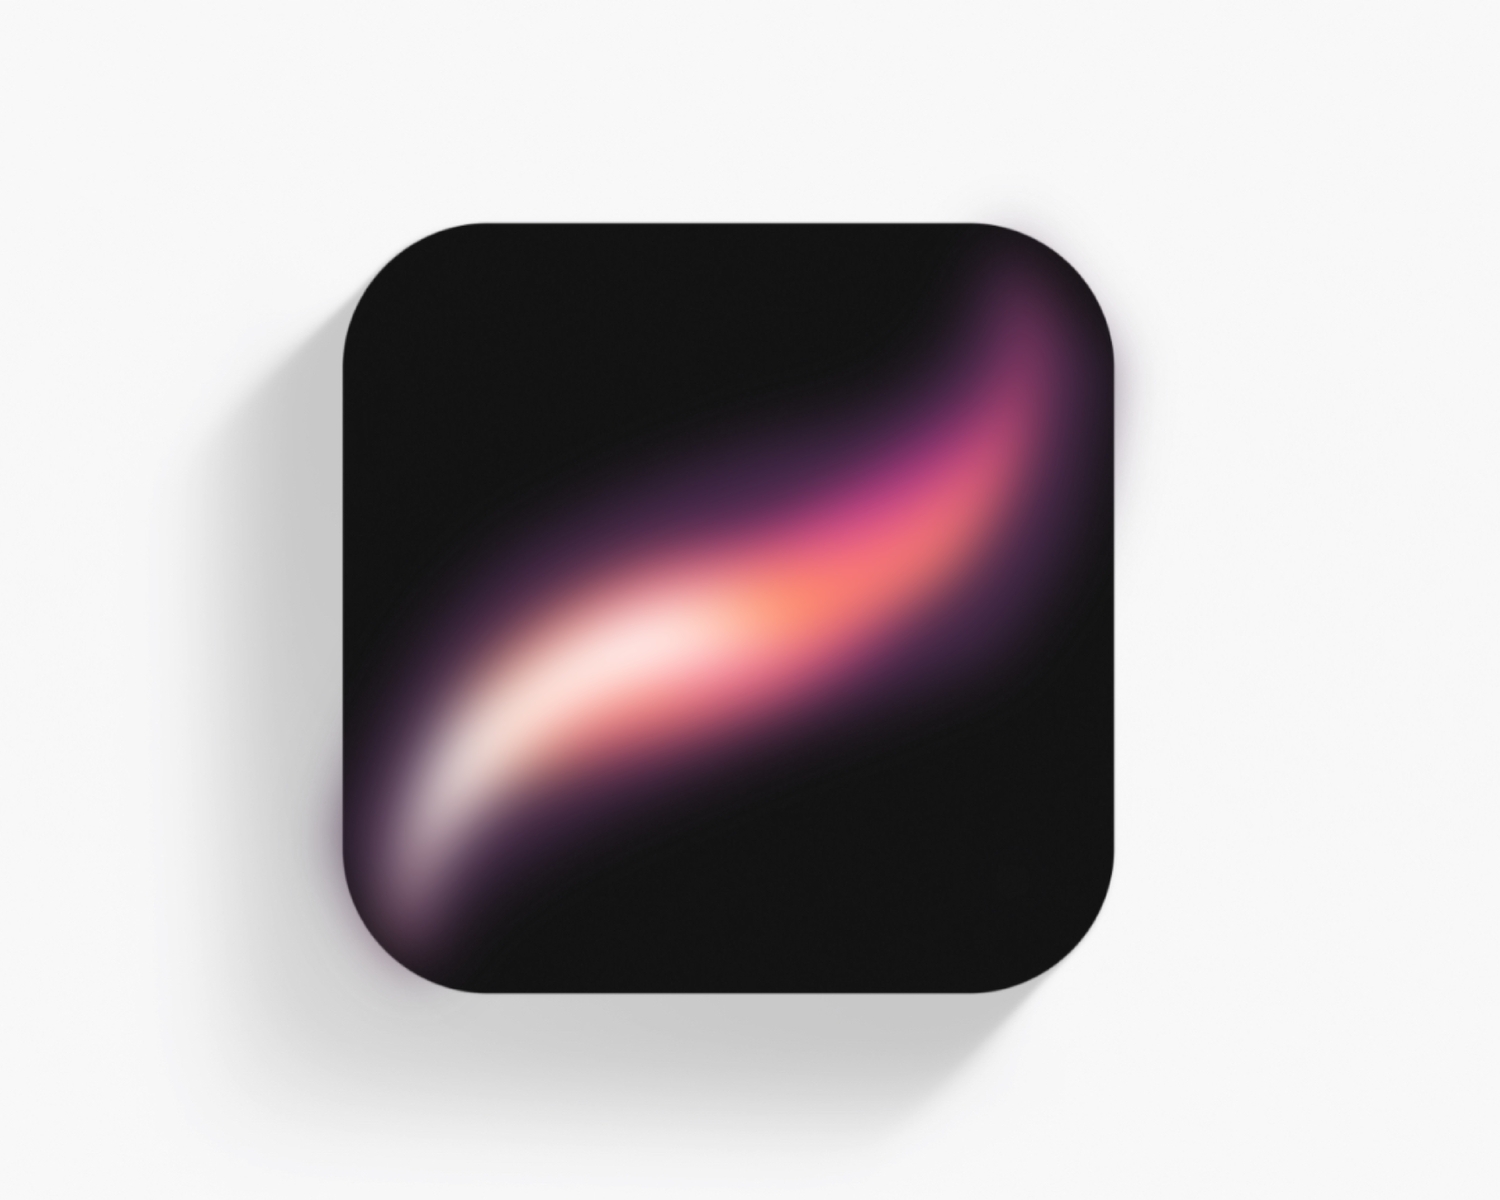 Redesign the Procreate logo by Anna Shak on Dribbble